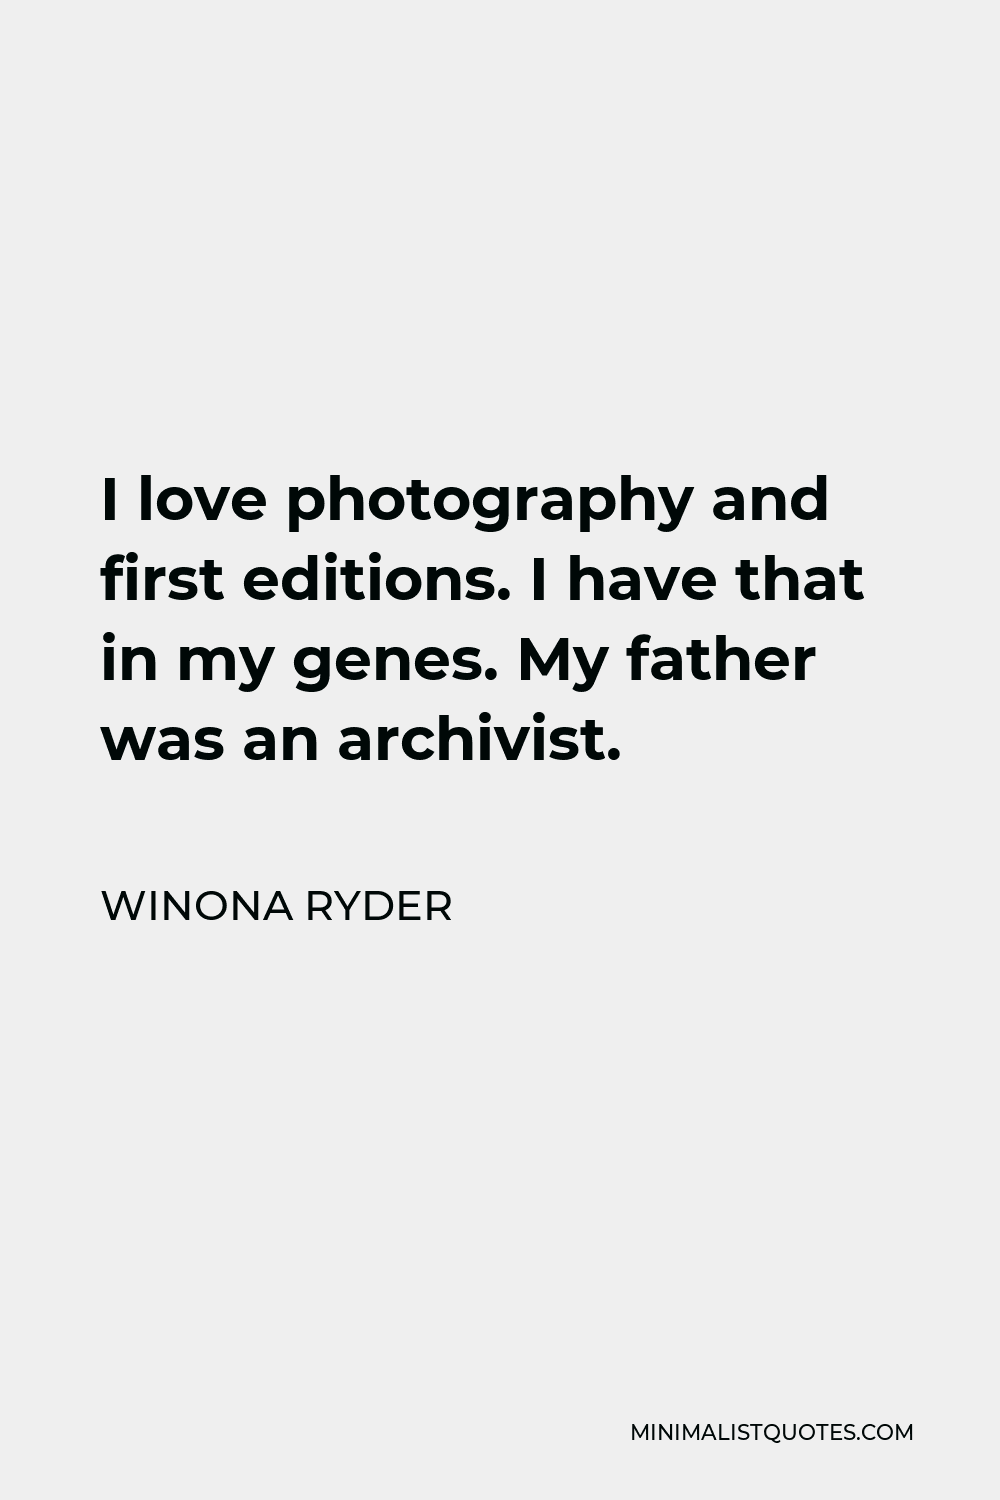 Winona Ryder Quote - I love photography and first editions. I have that in my genes. My father was an archivist.